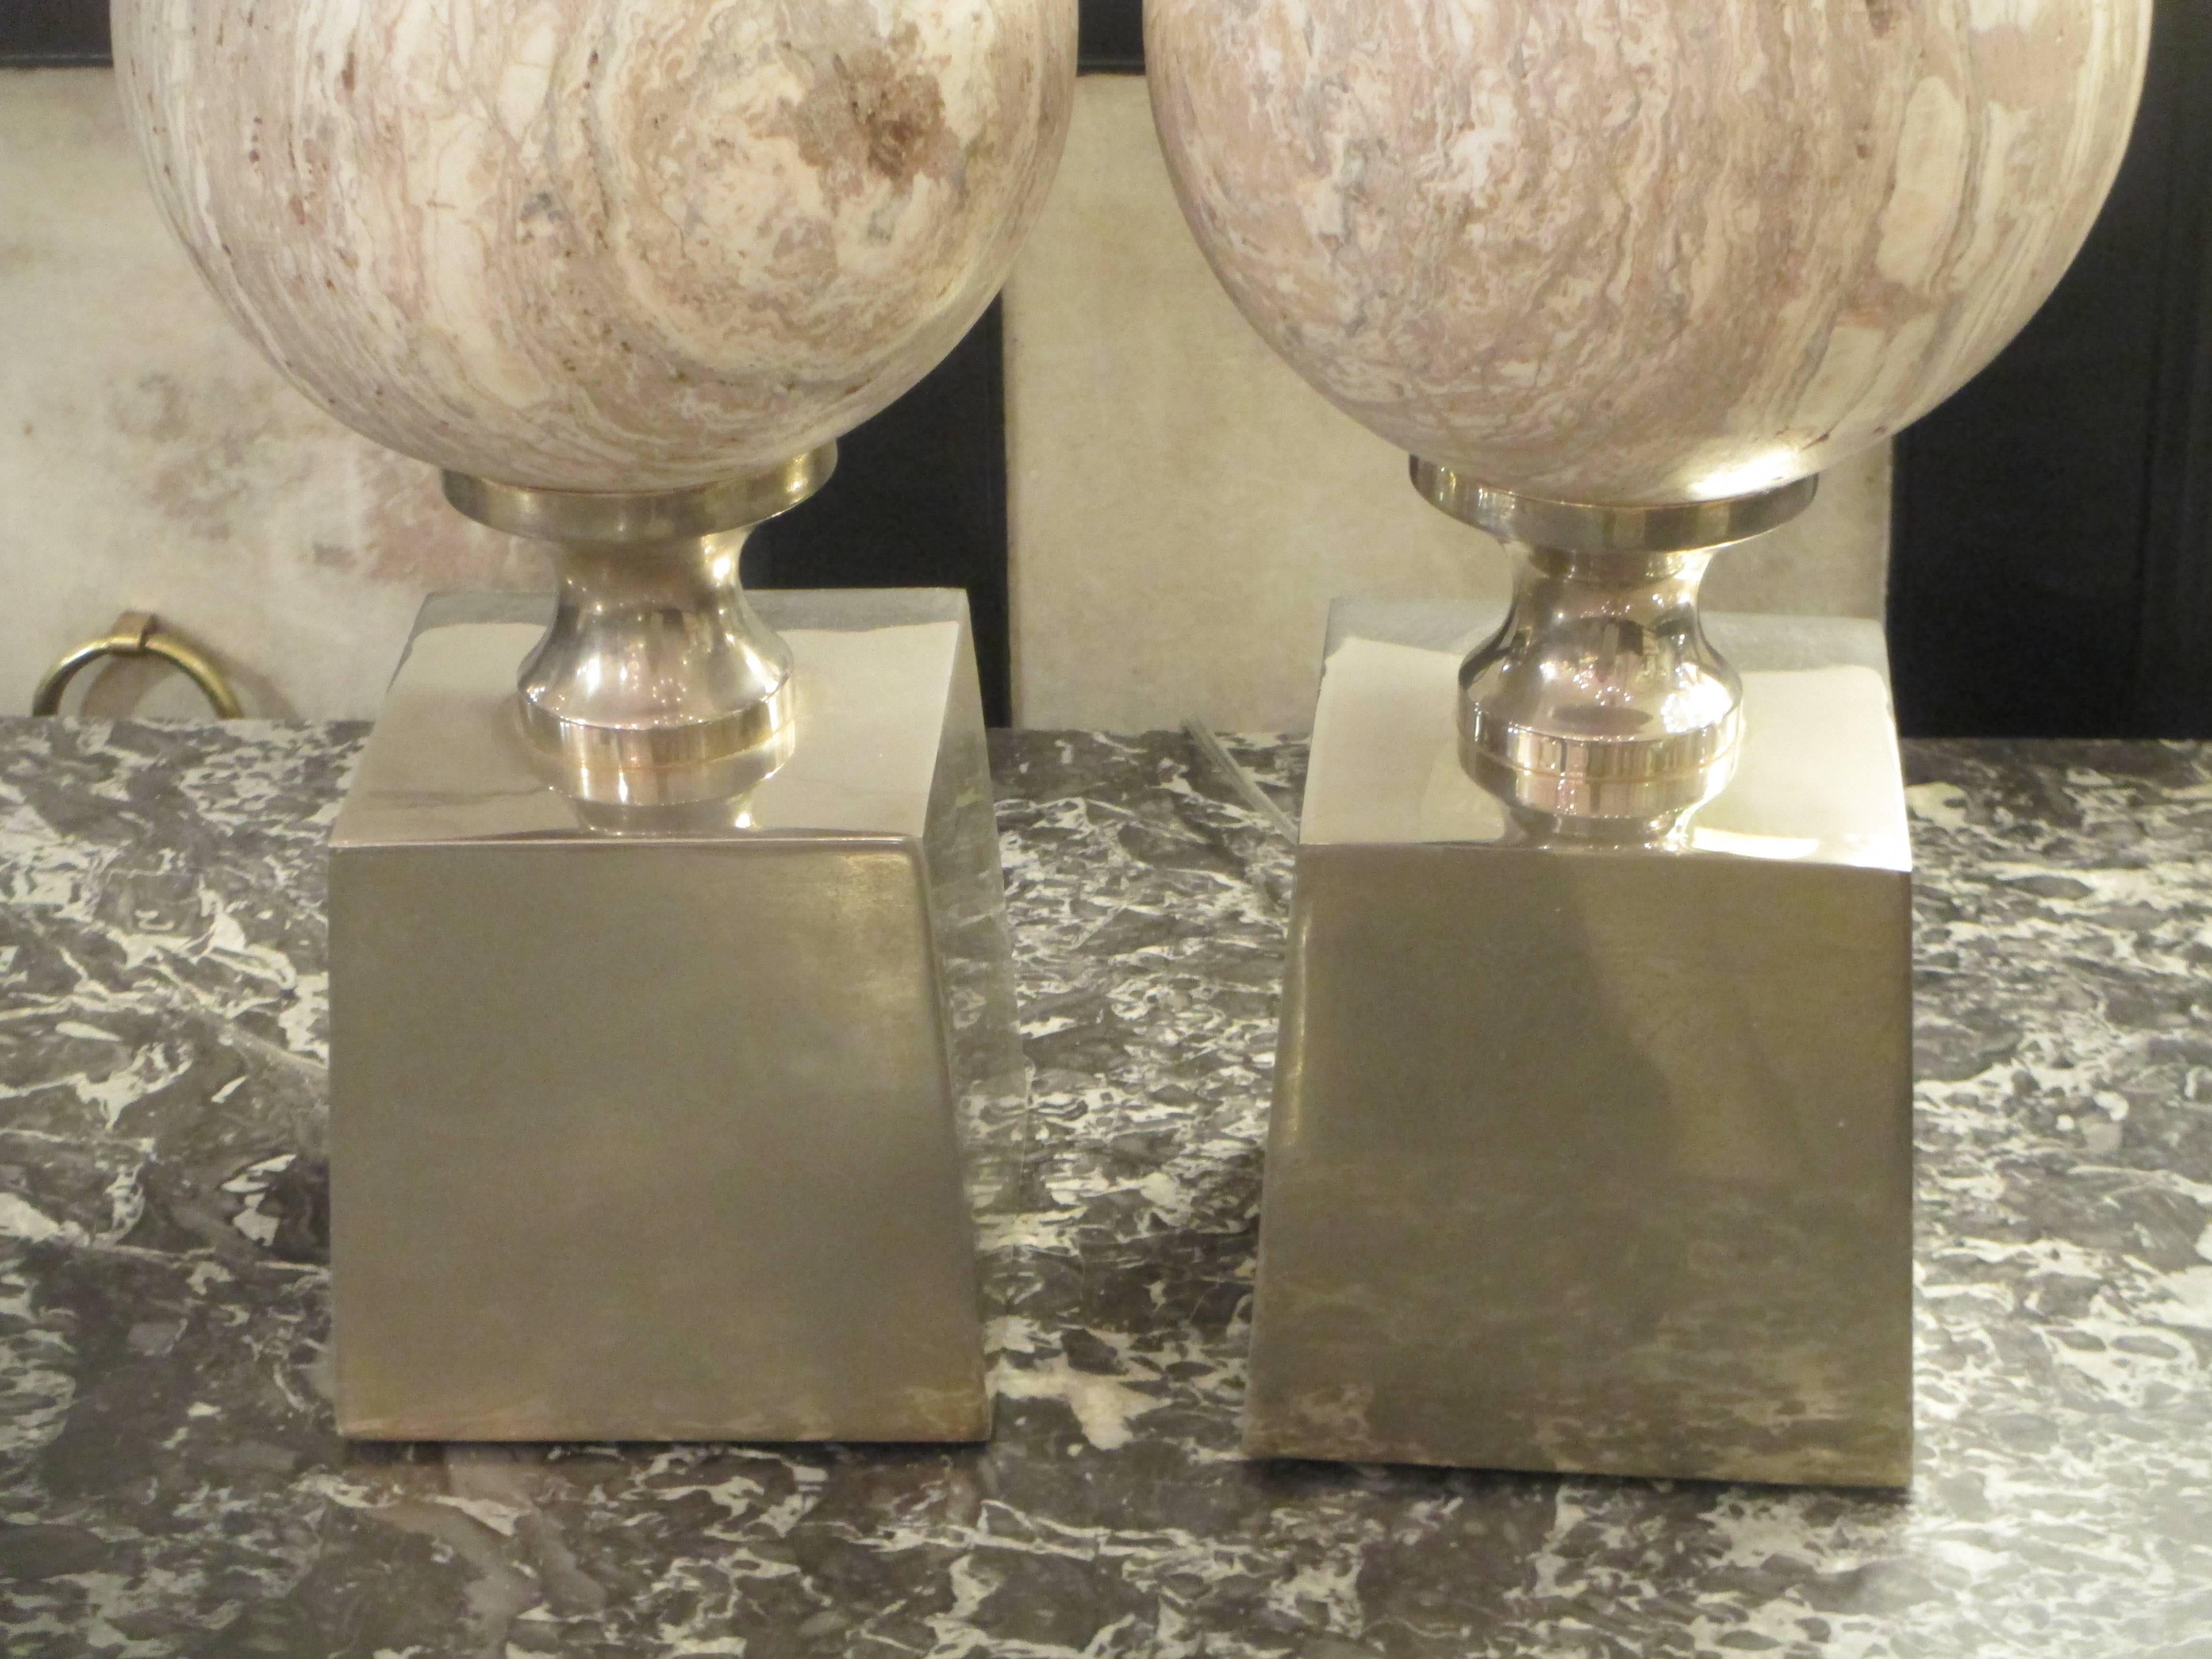 French Sculptural Pair of Travertine Lamps on Chrome-Plated Plinth Bases